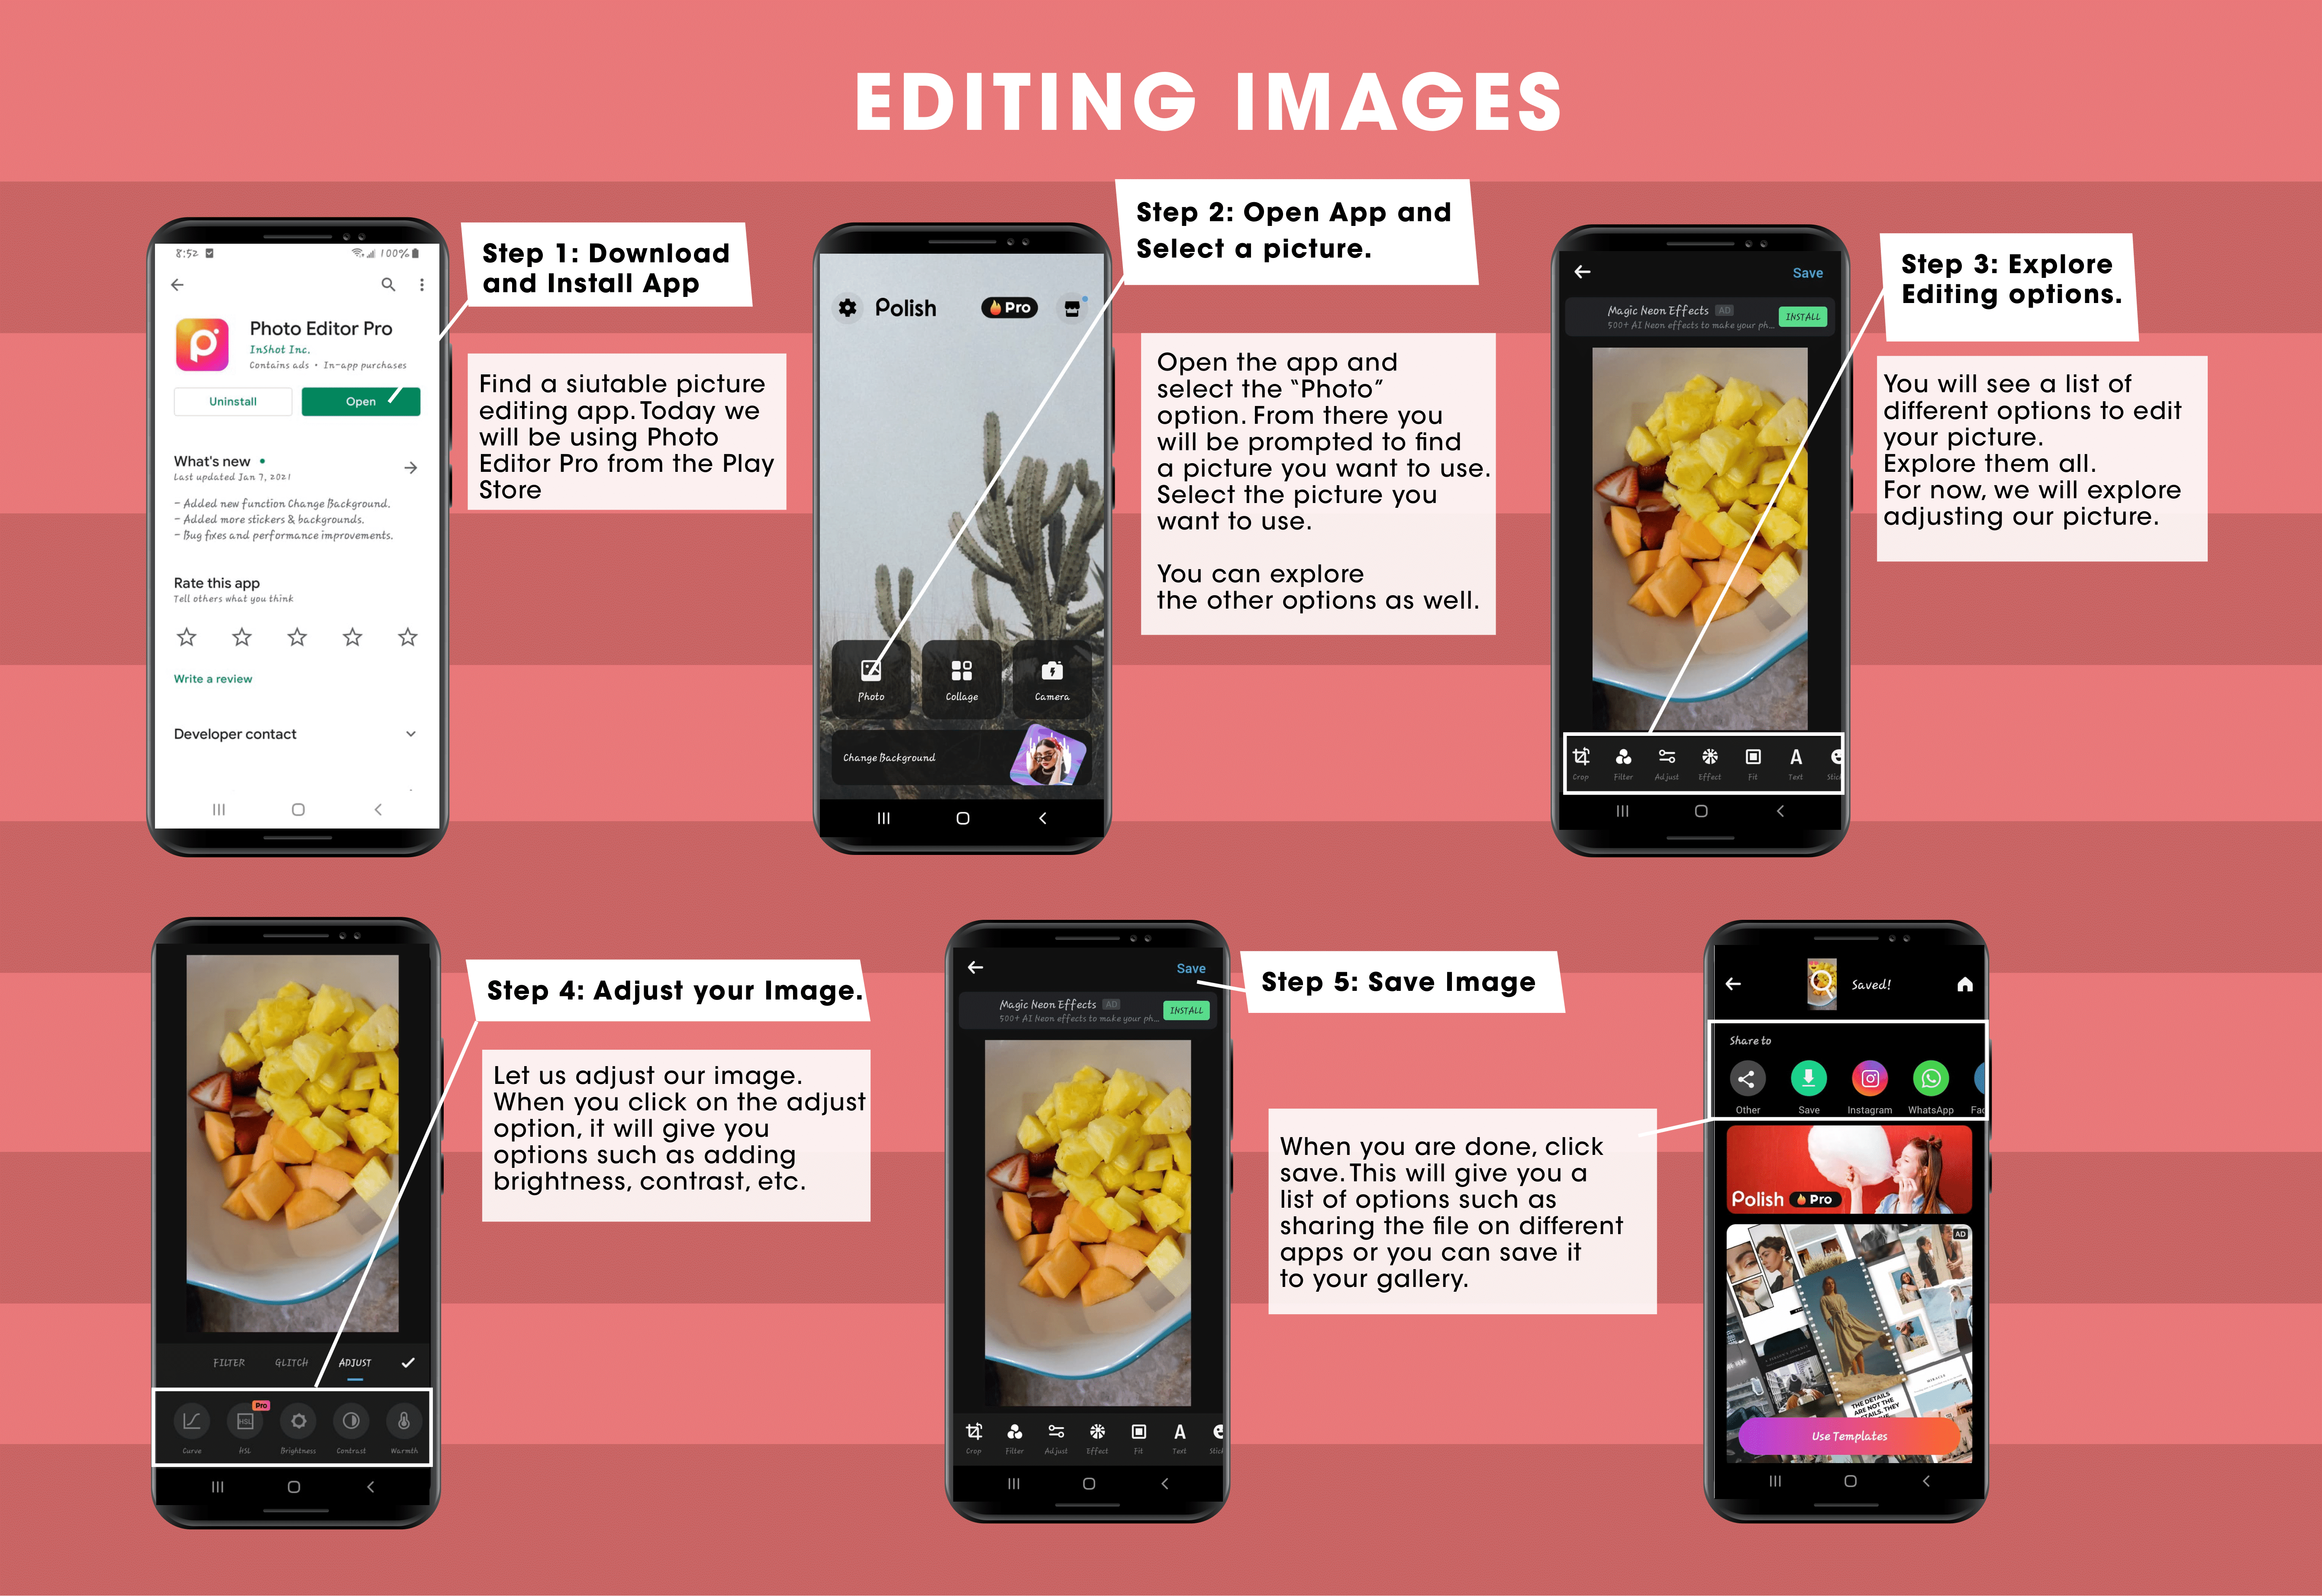 Graphic showing the different steps in editing images